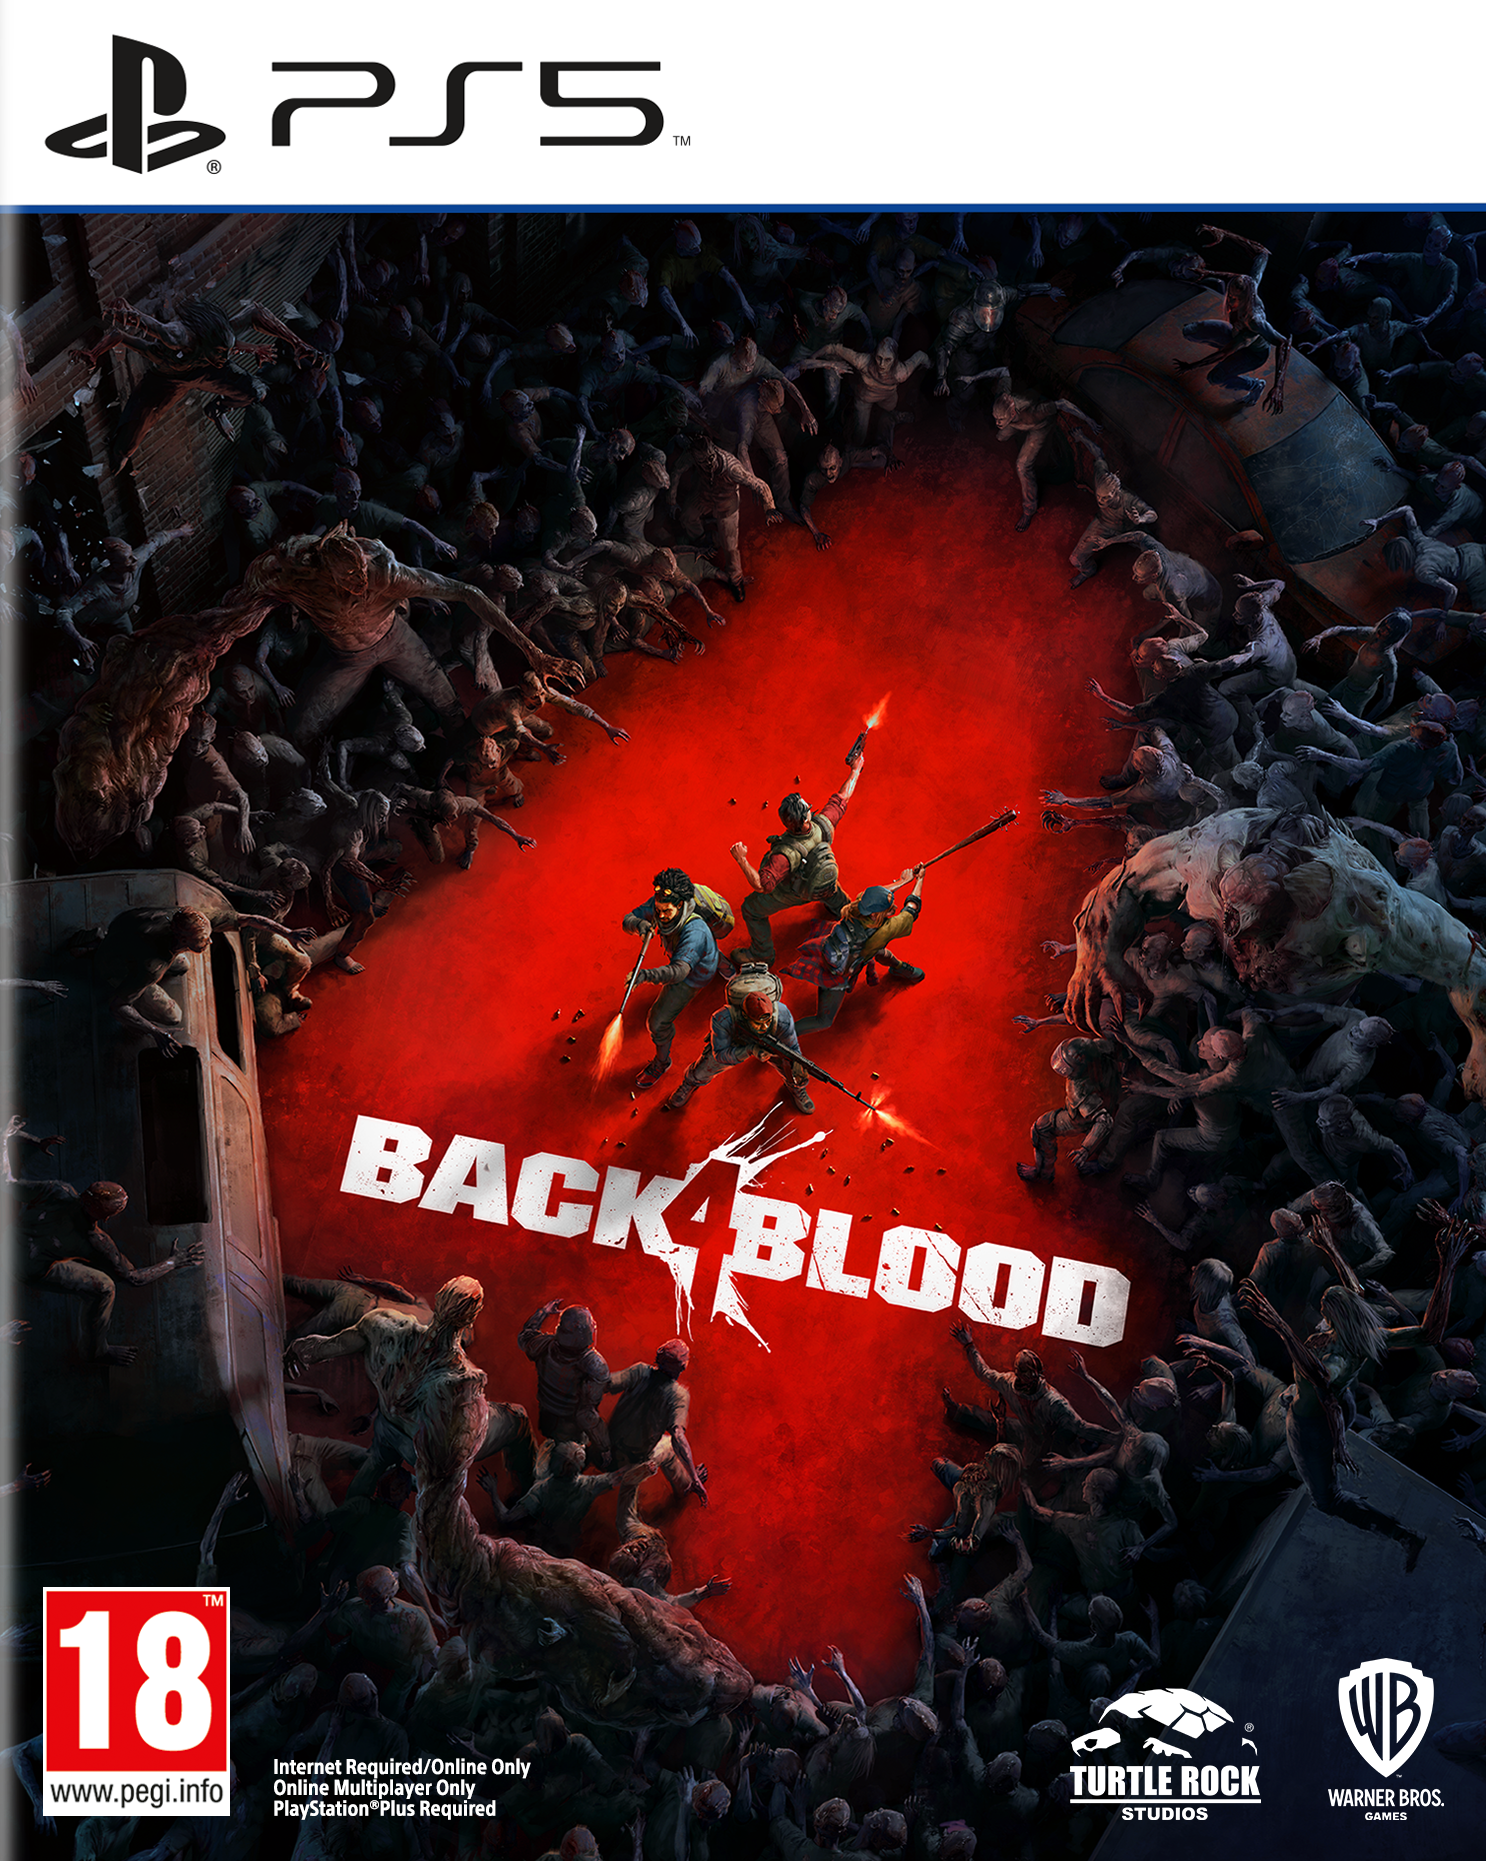 Buy Online Latest Premium Quality BACK 4 BLOOD - Playstation 5 - Buy Tech Today